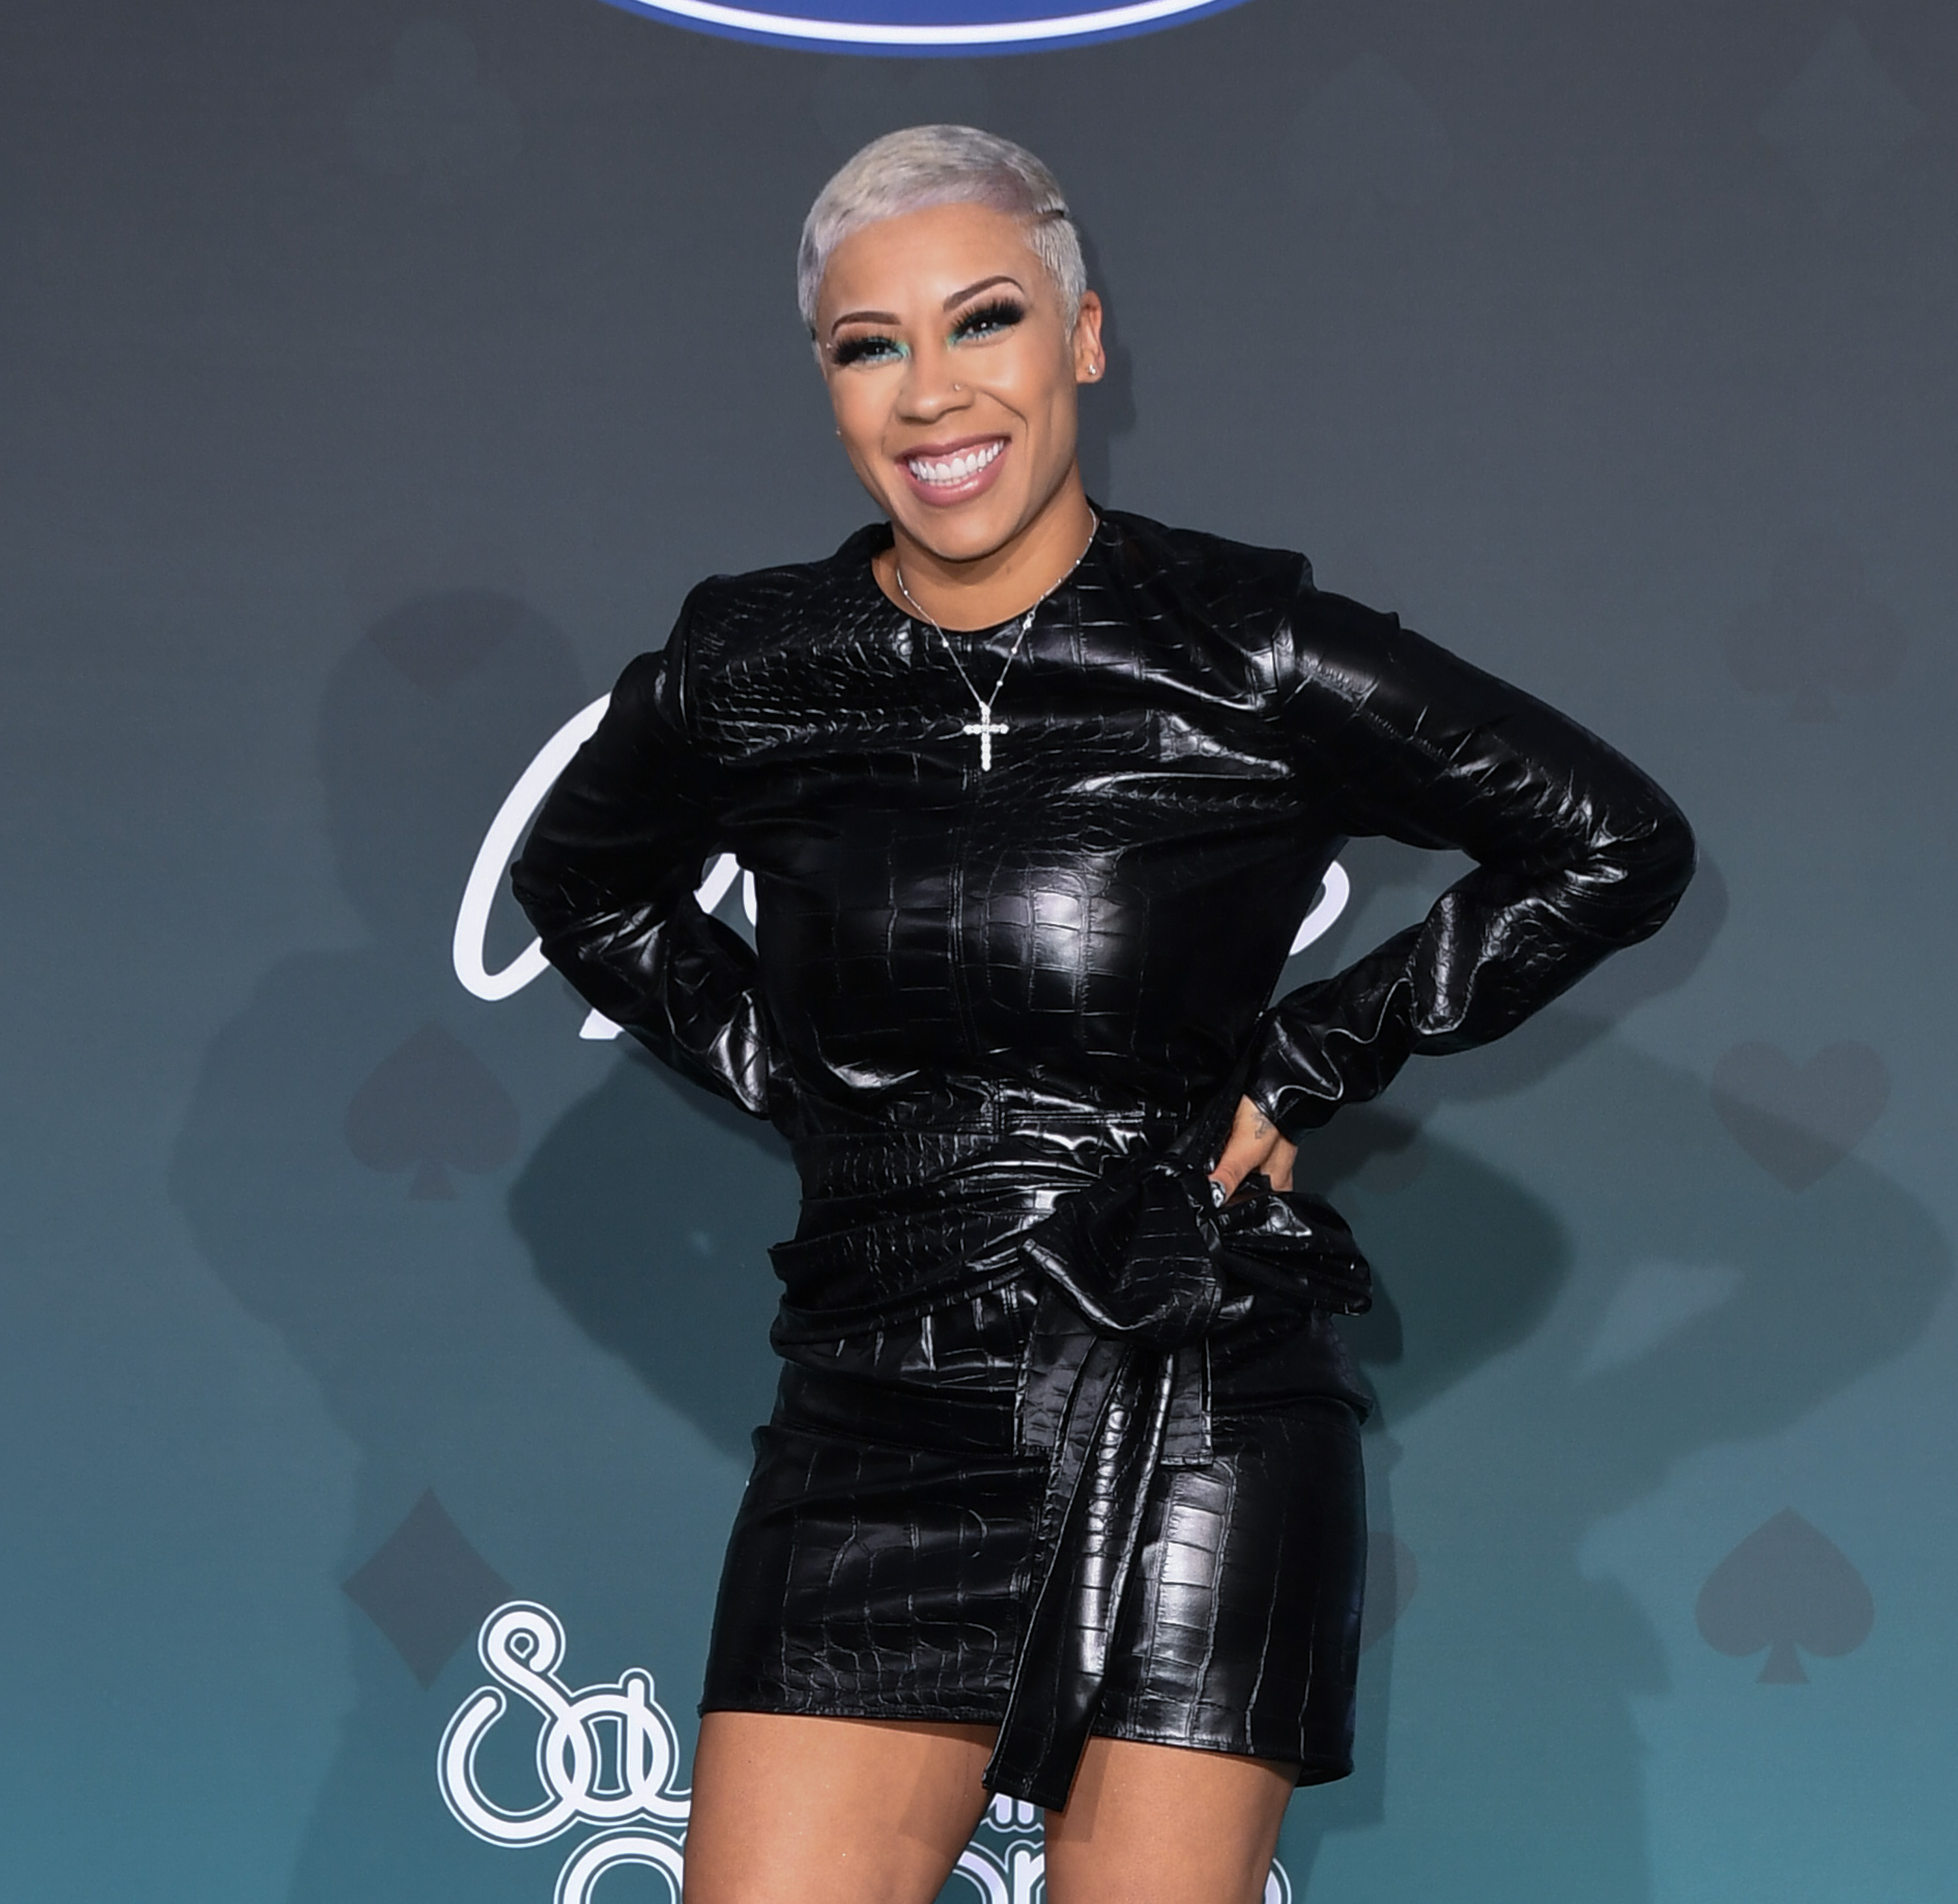 Keyshia Cole at the Soul Train Awards on November 17, 2019, in Las Vegas, Nevada | Source: Getty Images